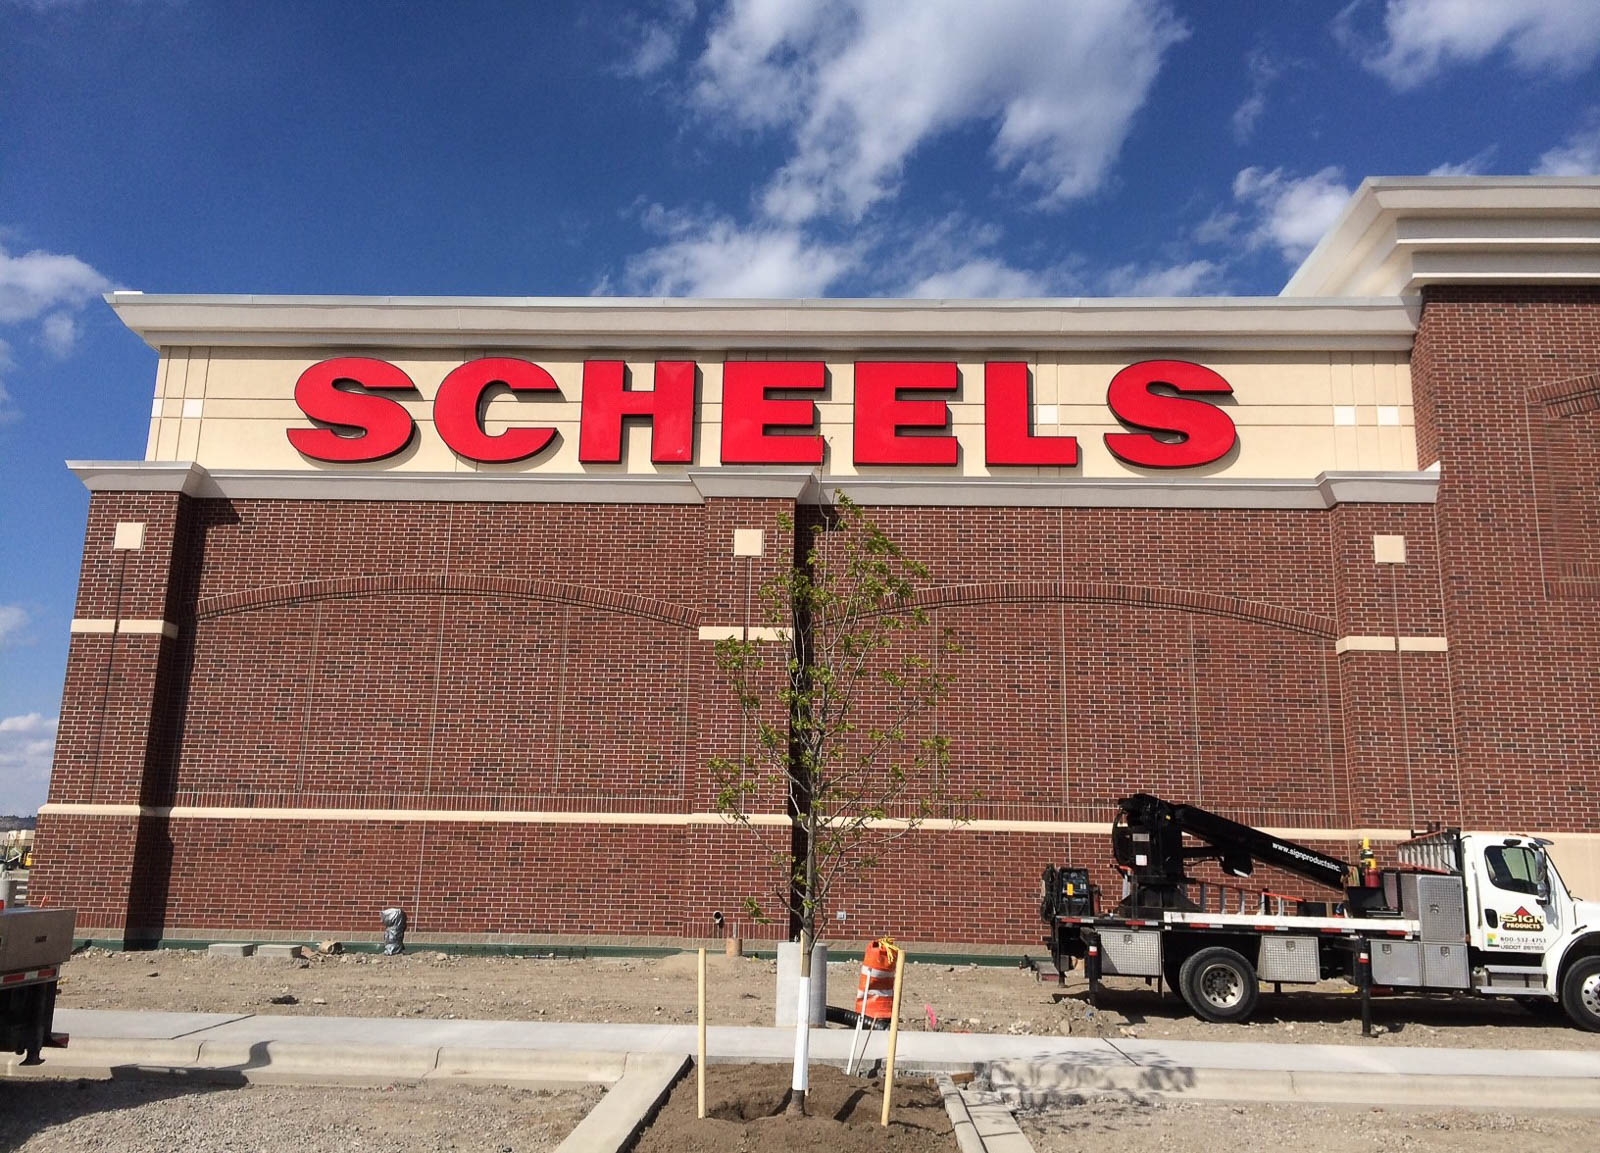 Channel Letters: Sign for Scheels building